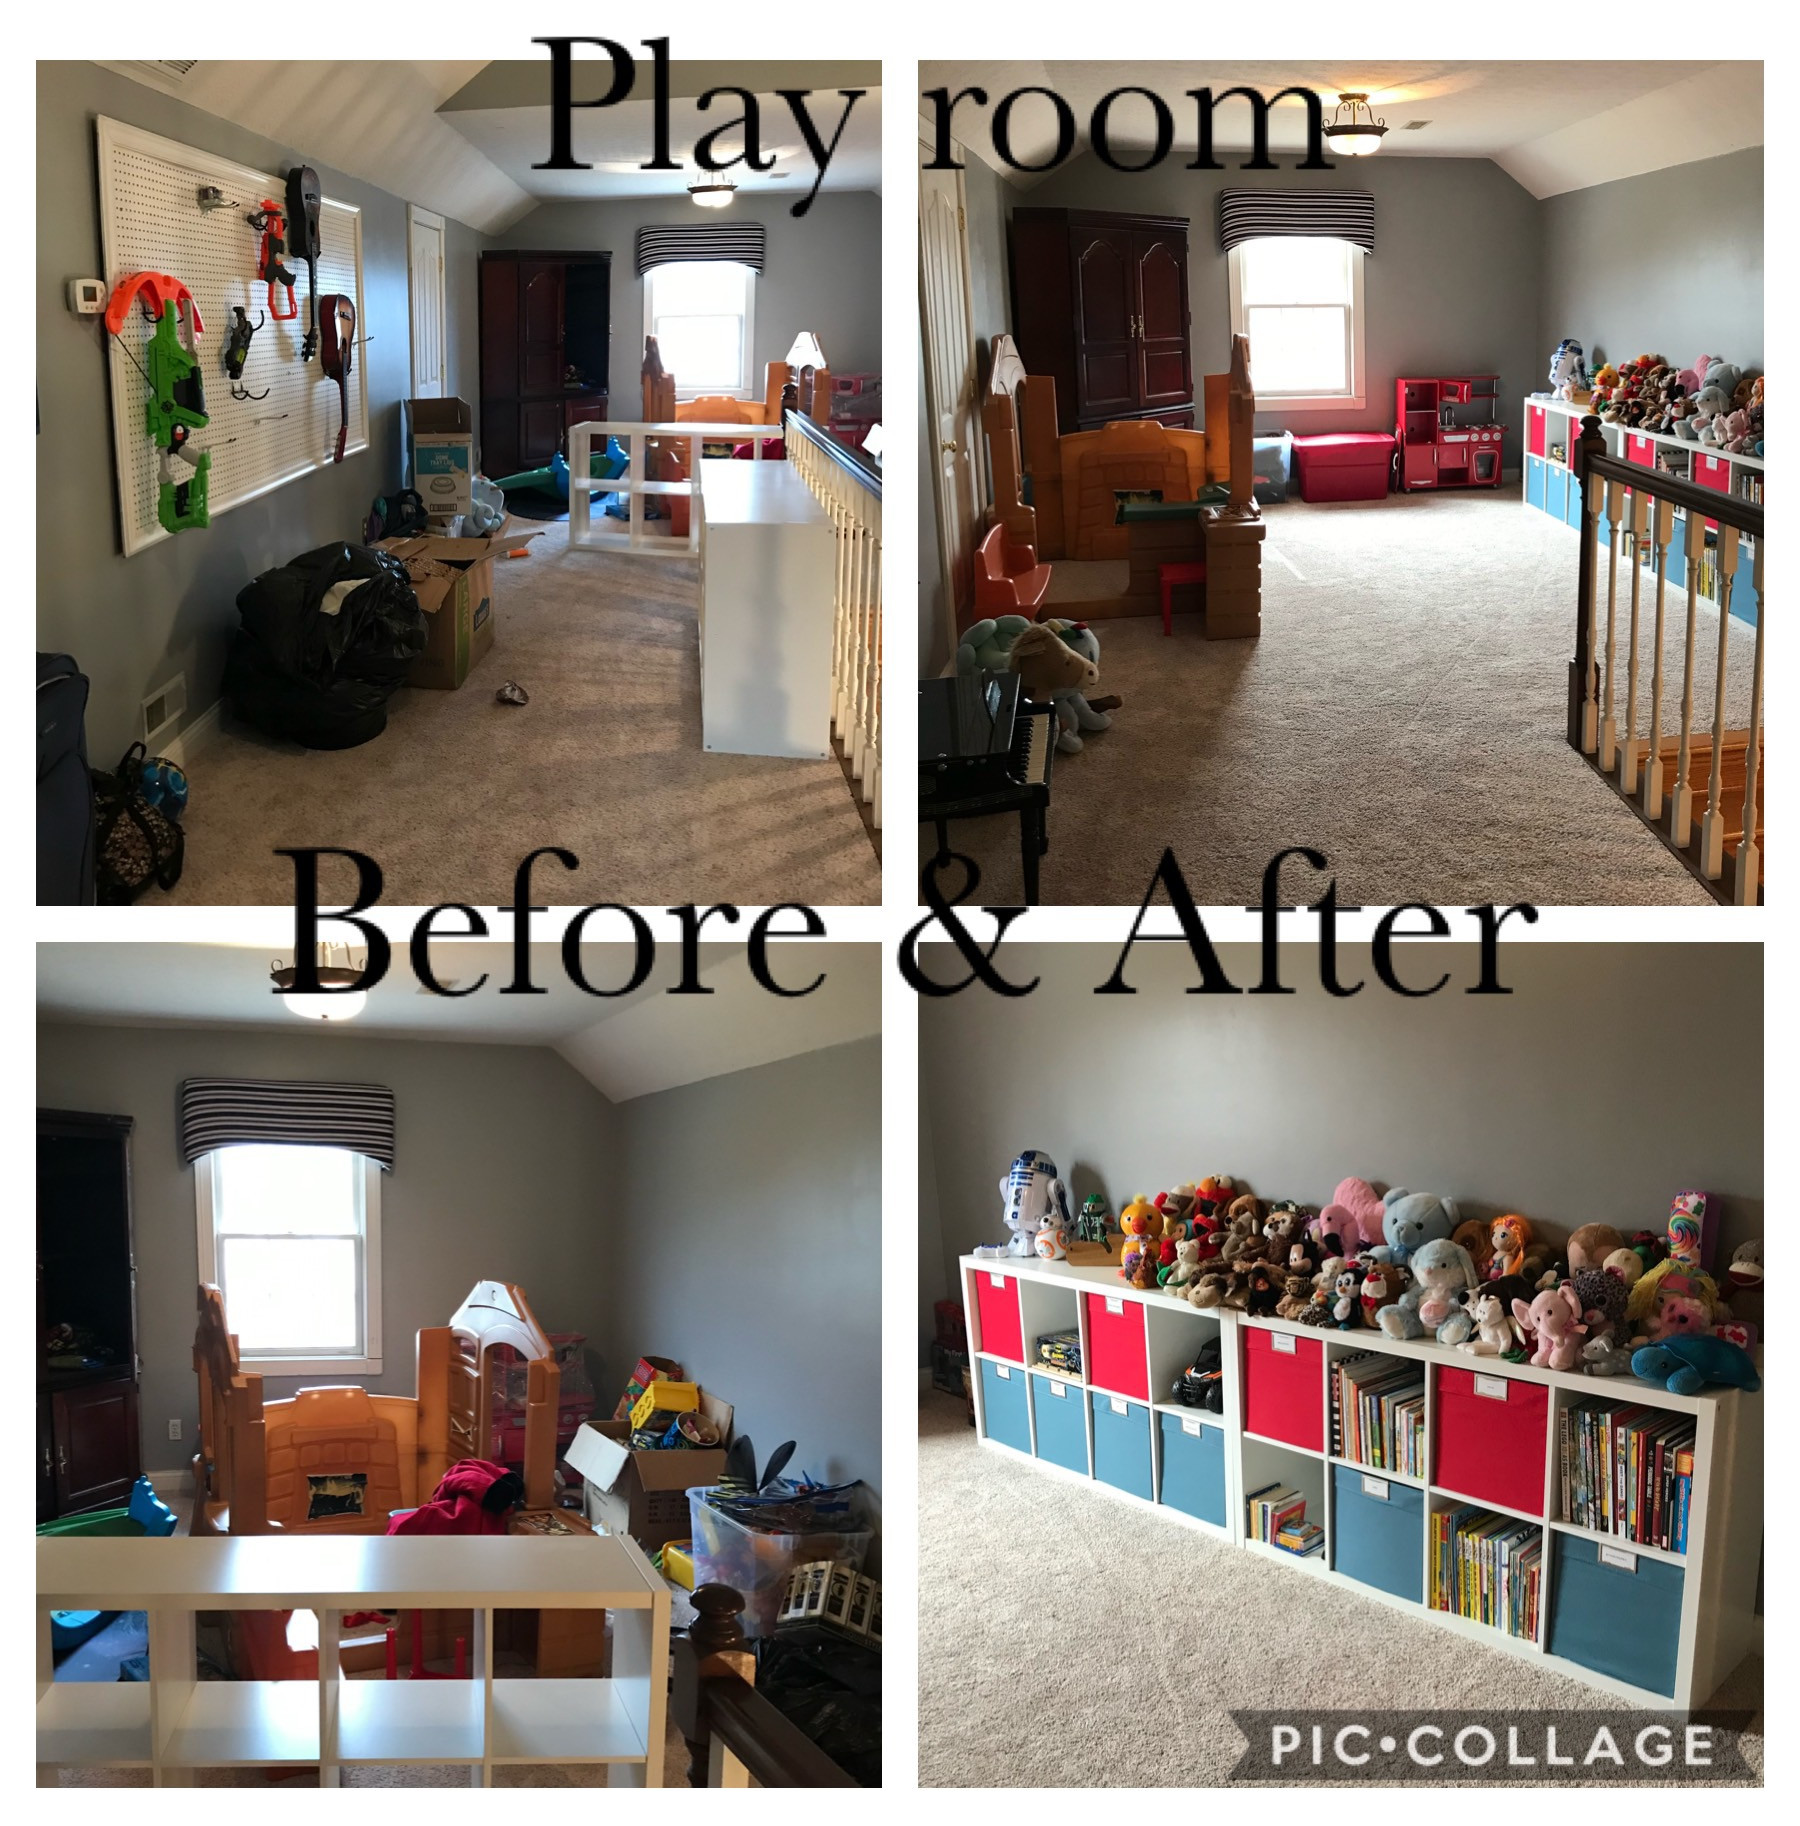 Playroom before and after